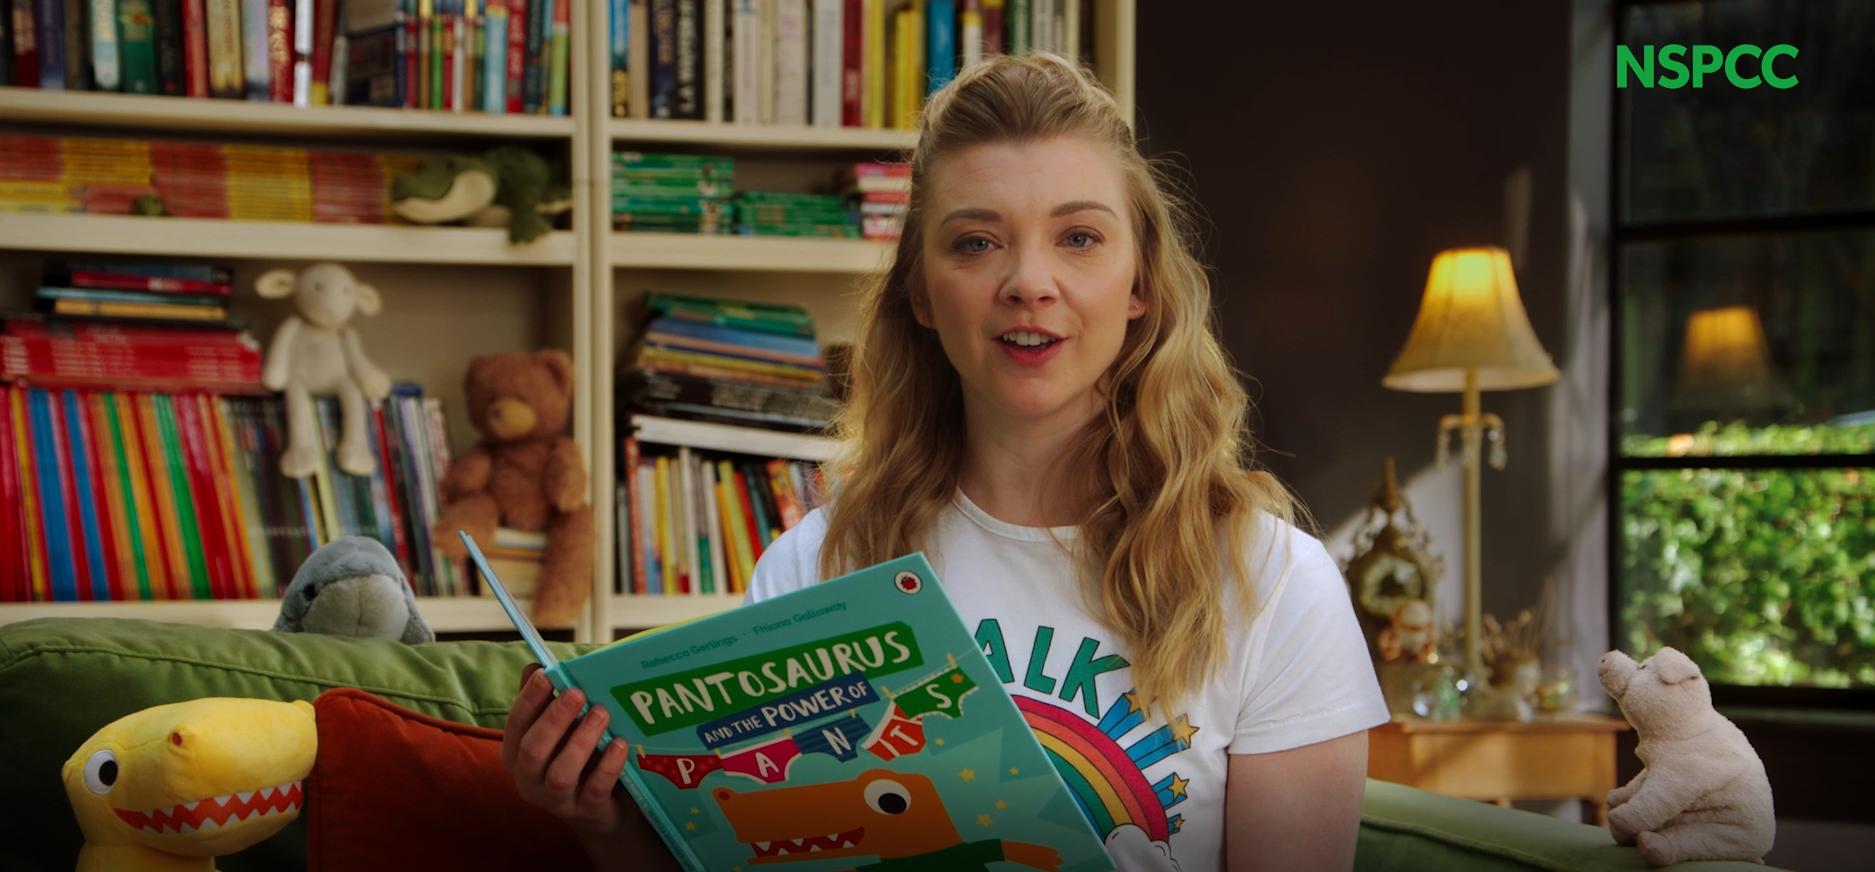 NSPCC’s Pantosaurus and the Power of Pants Read Aloud Video By Natalie Dormer